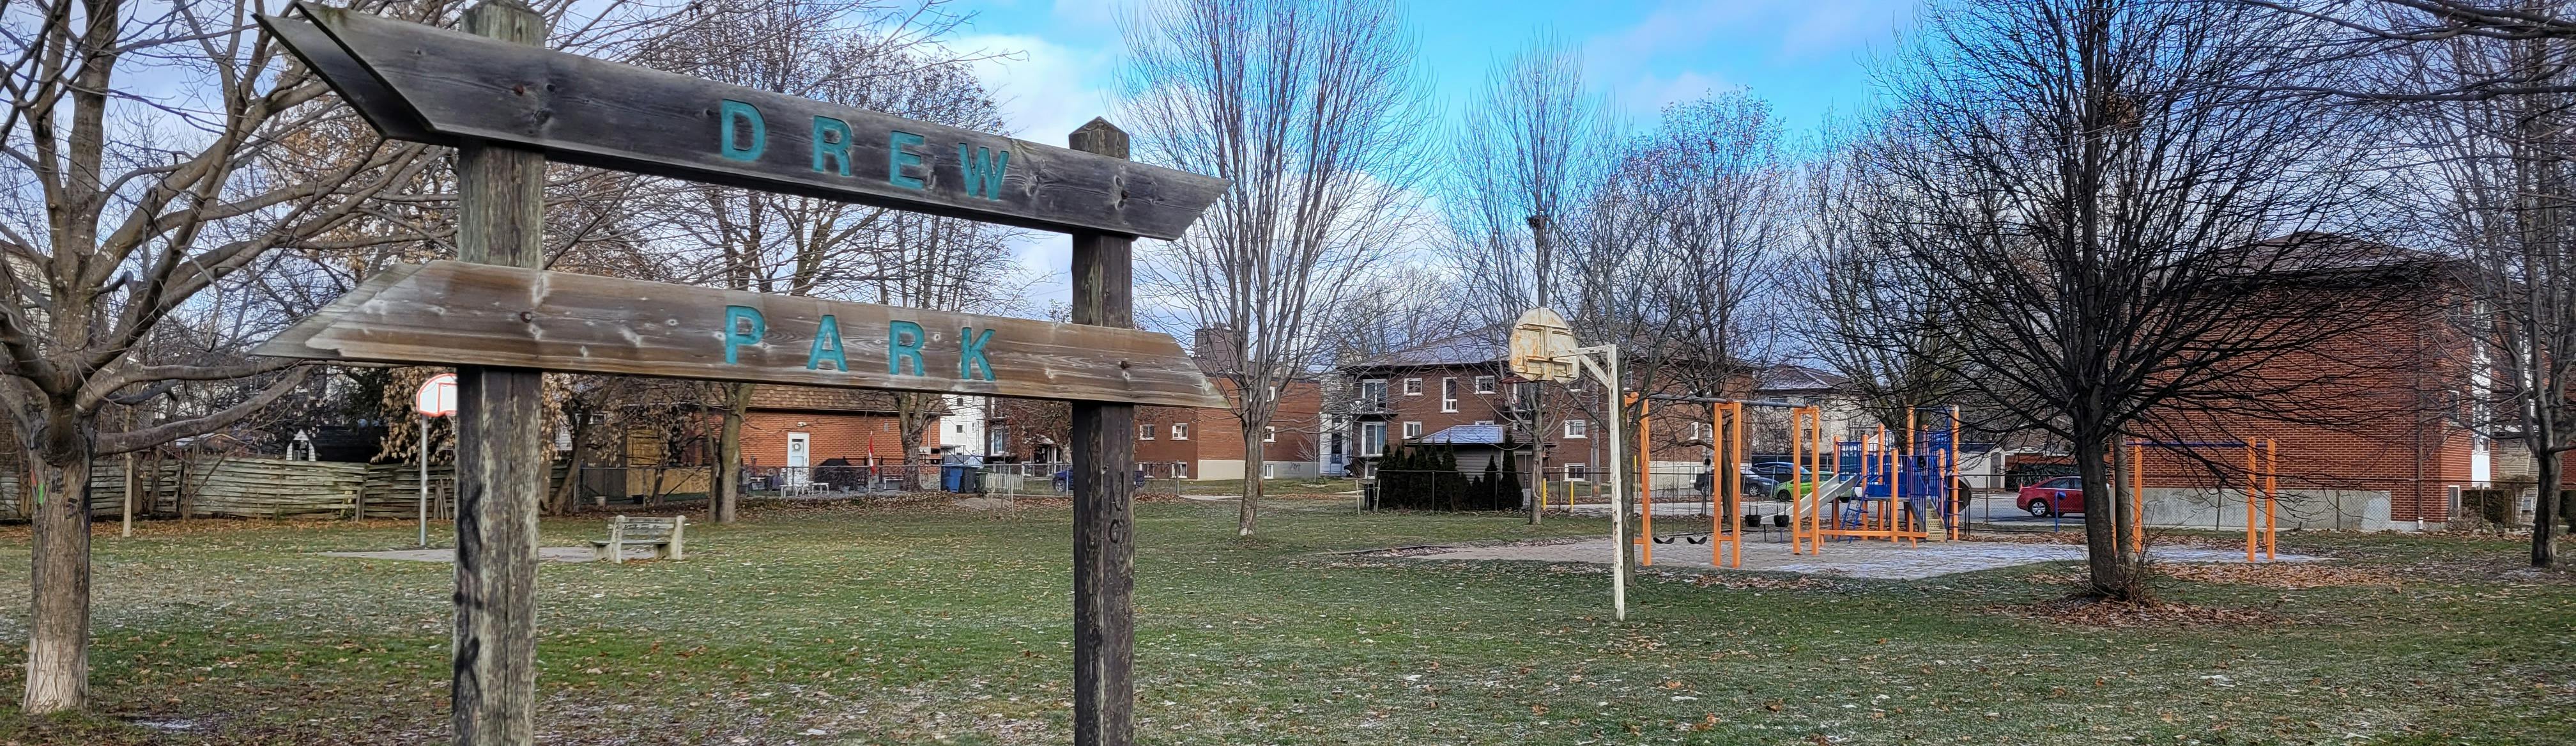 A tree lined Drew Park, showing the welcome sign, Basketball nets and playground and medium density housing in the background